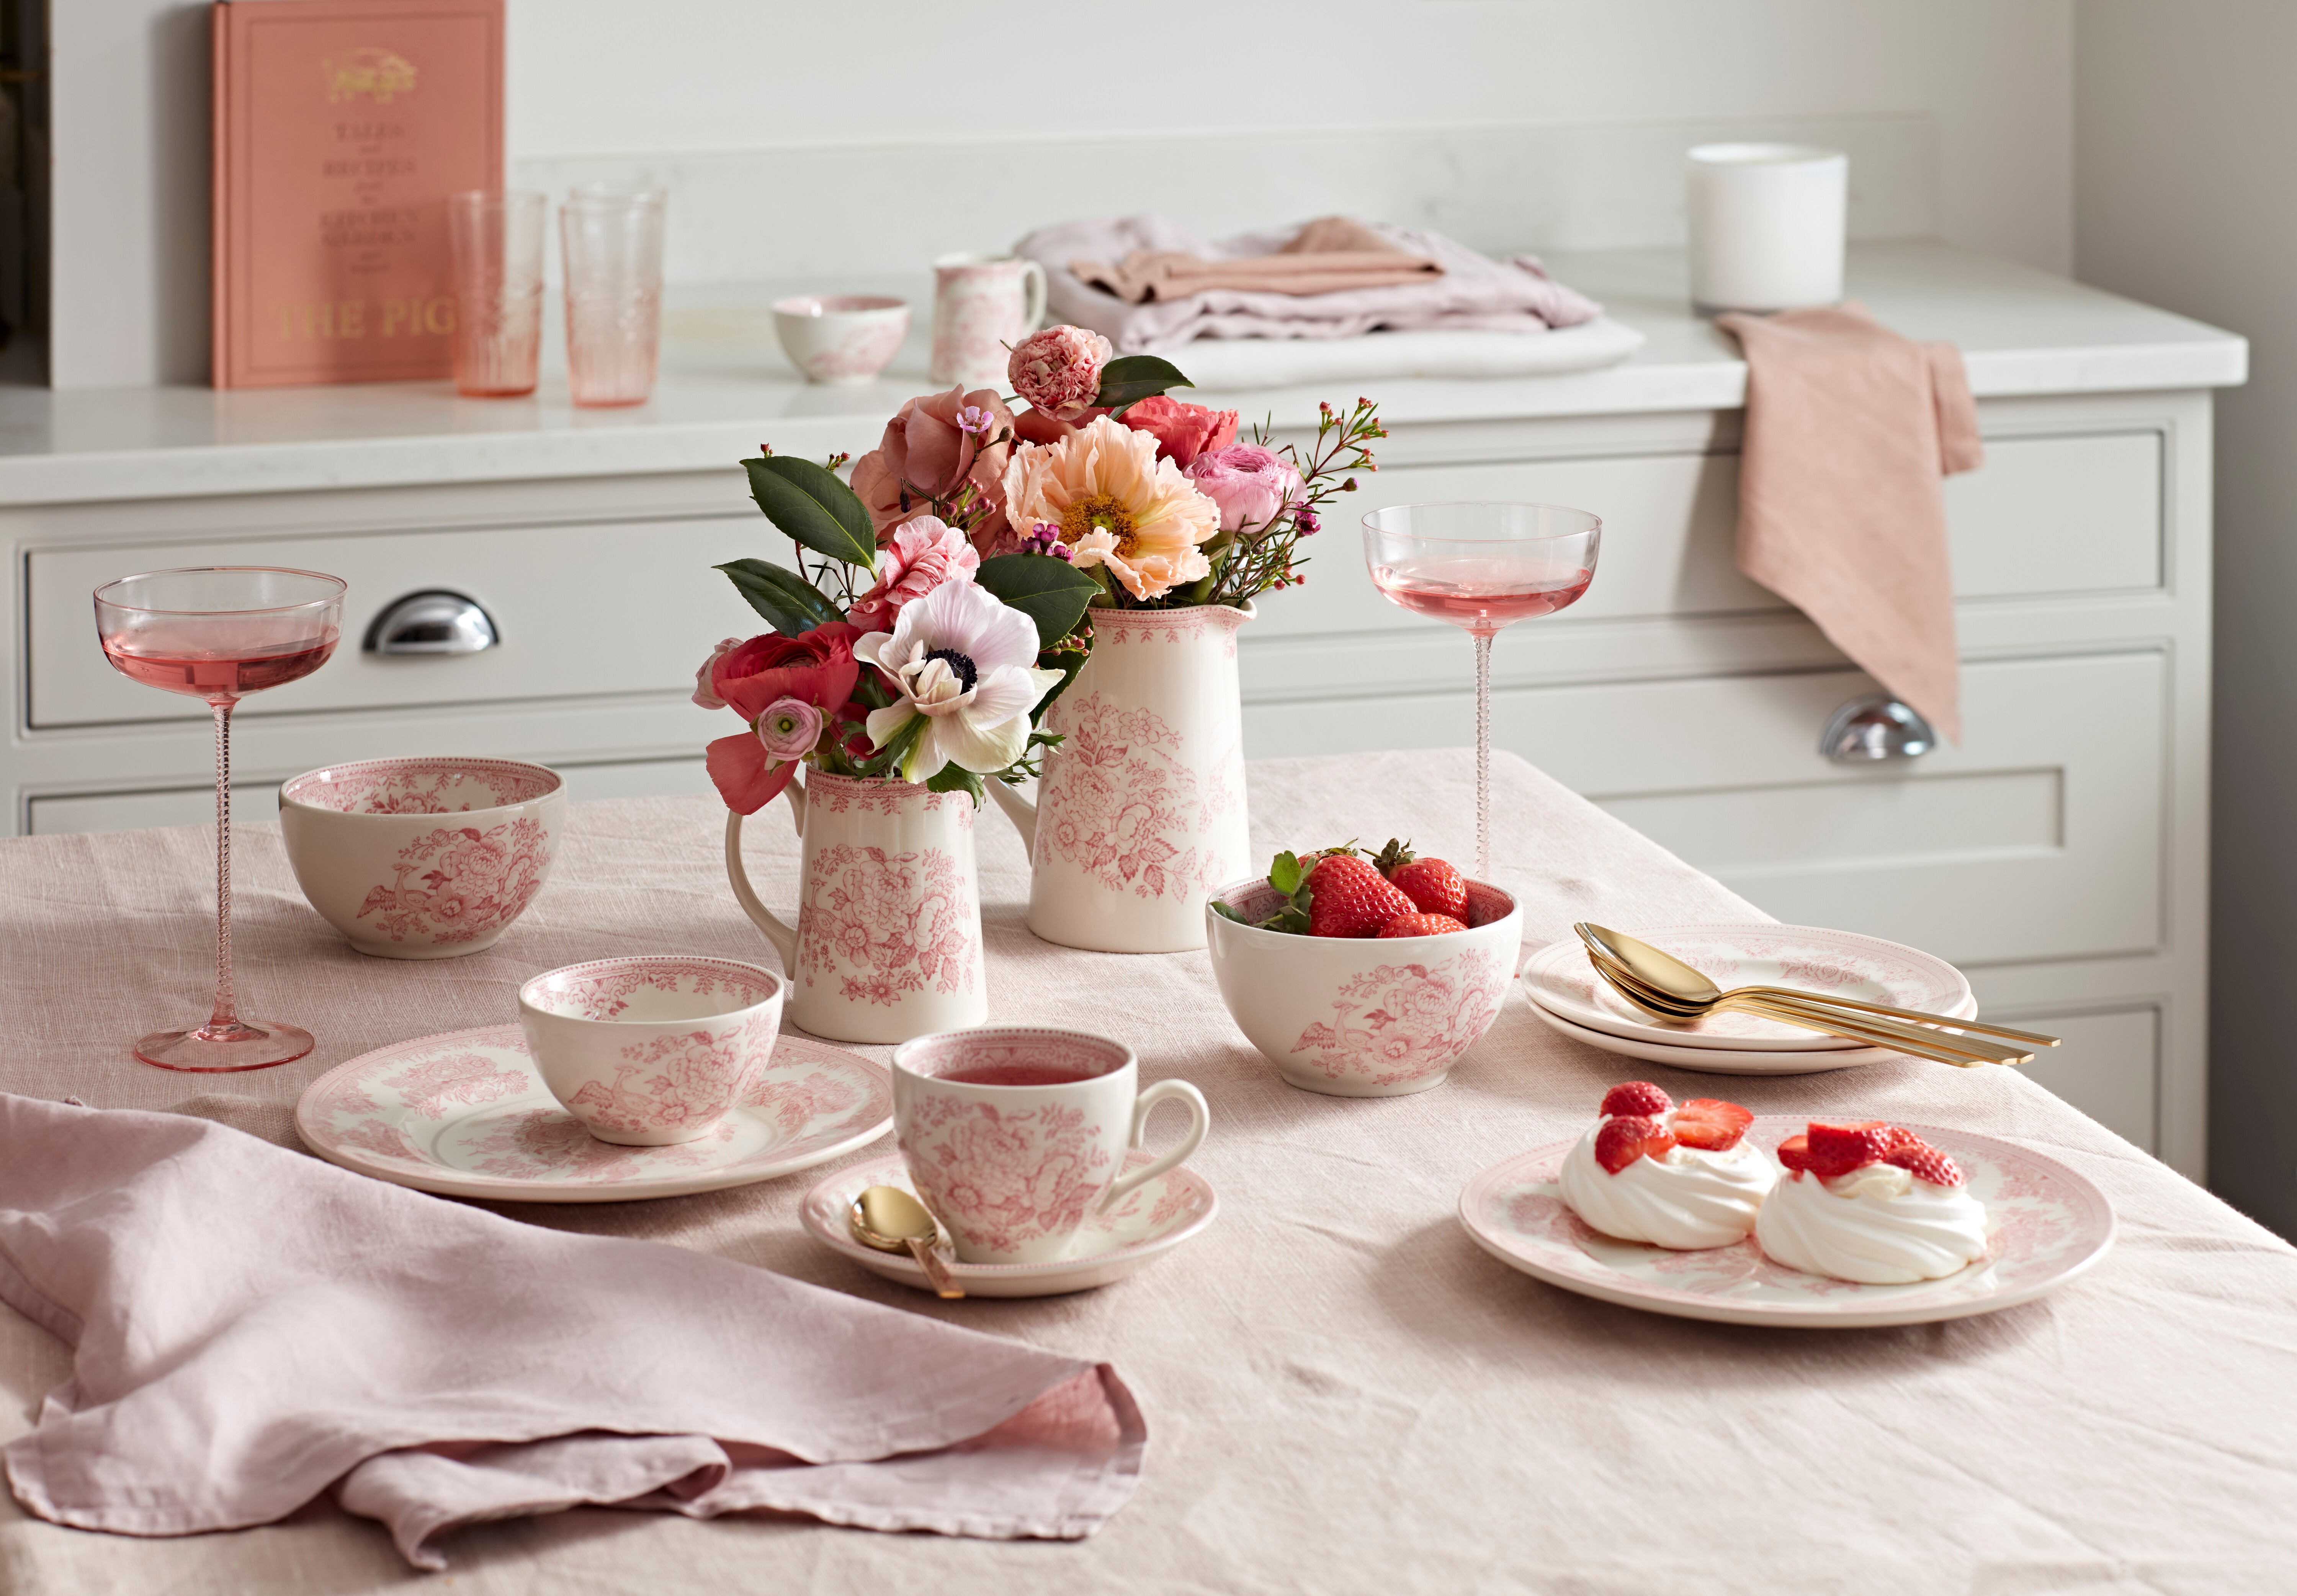 A balanced, eclectic feel: the Pink Asiatic Pheasant collection from Burleigh Pottery